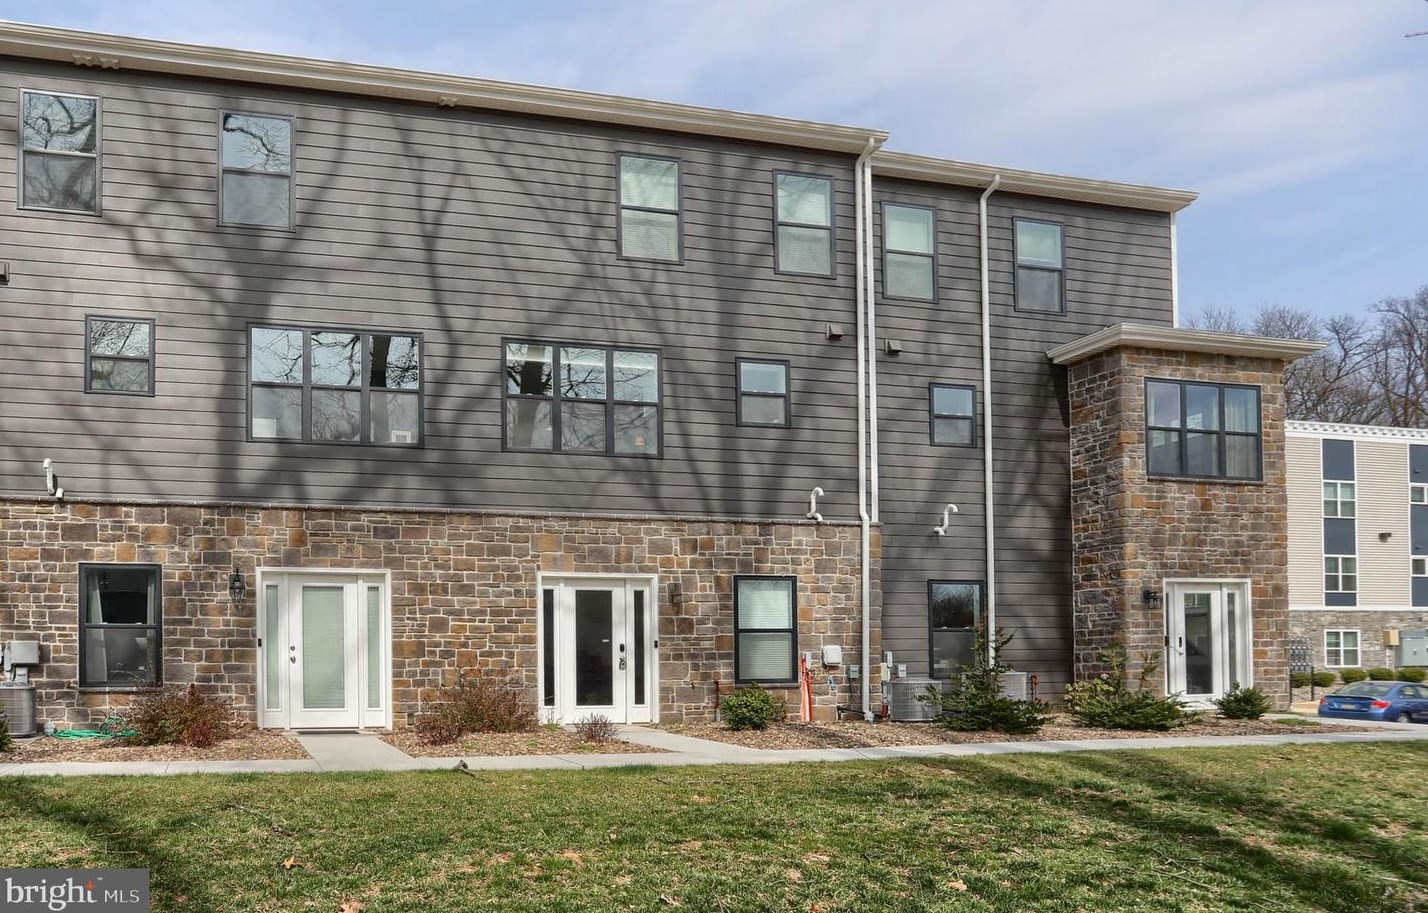 129 High Pointe Dr #33, Hummelstown, PA 17036